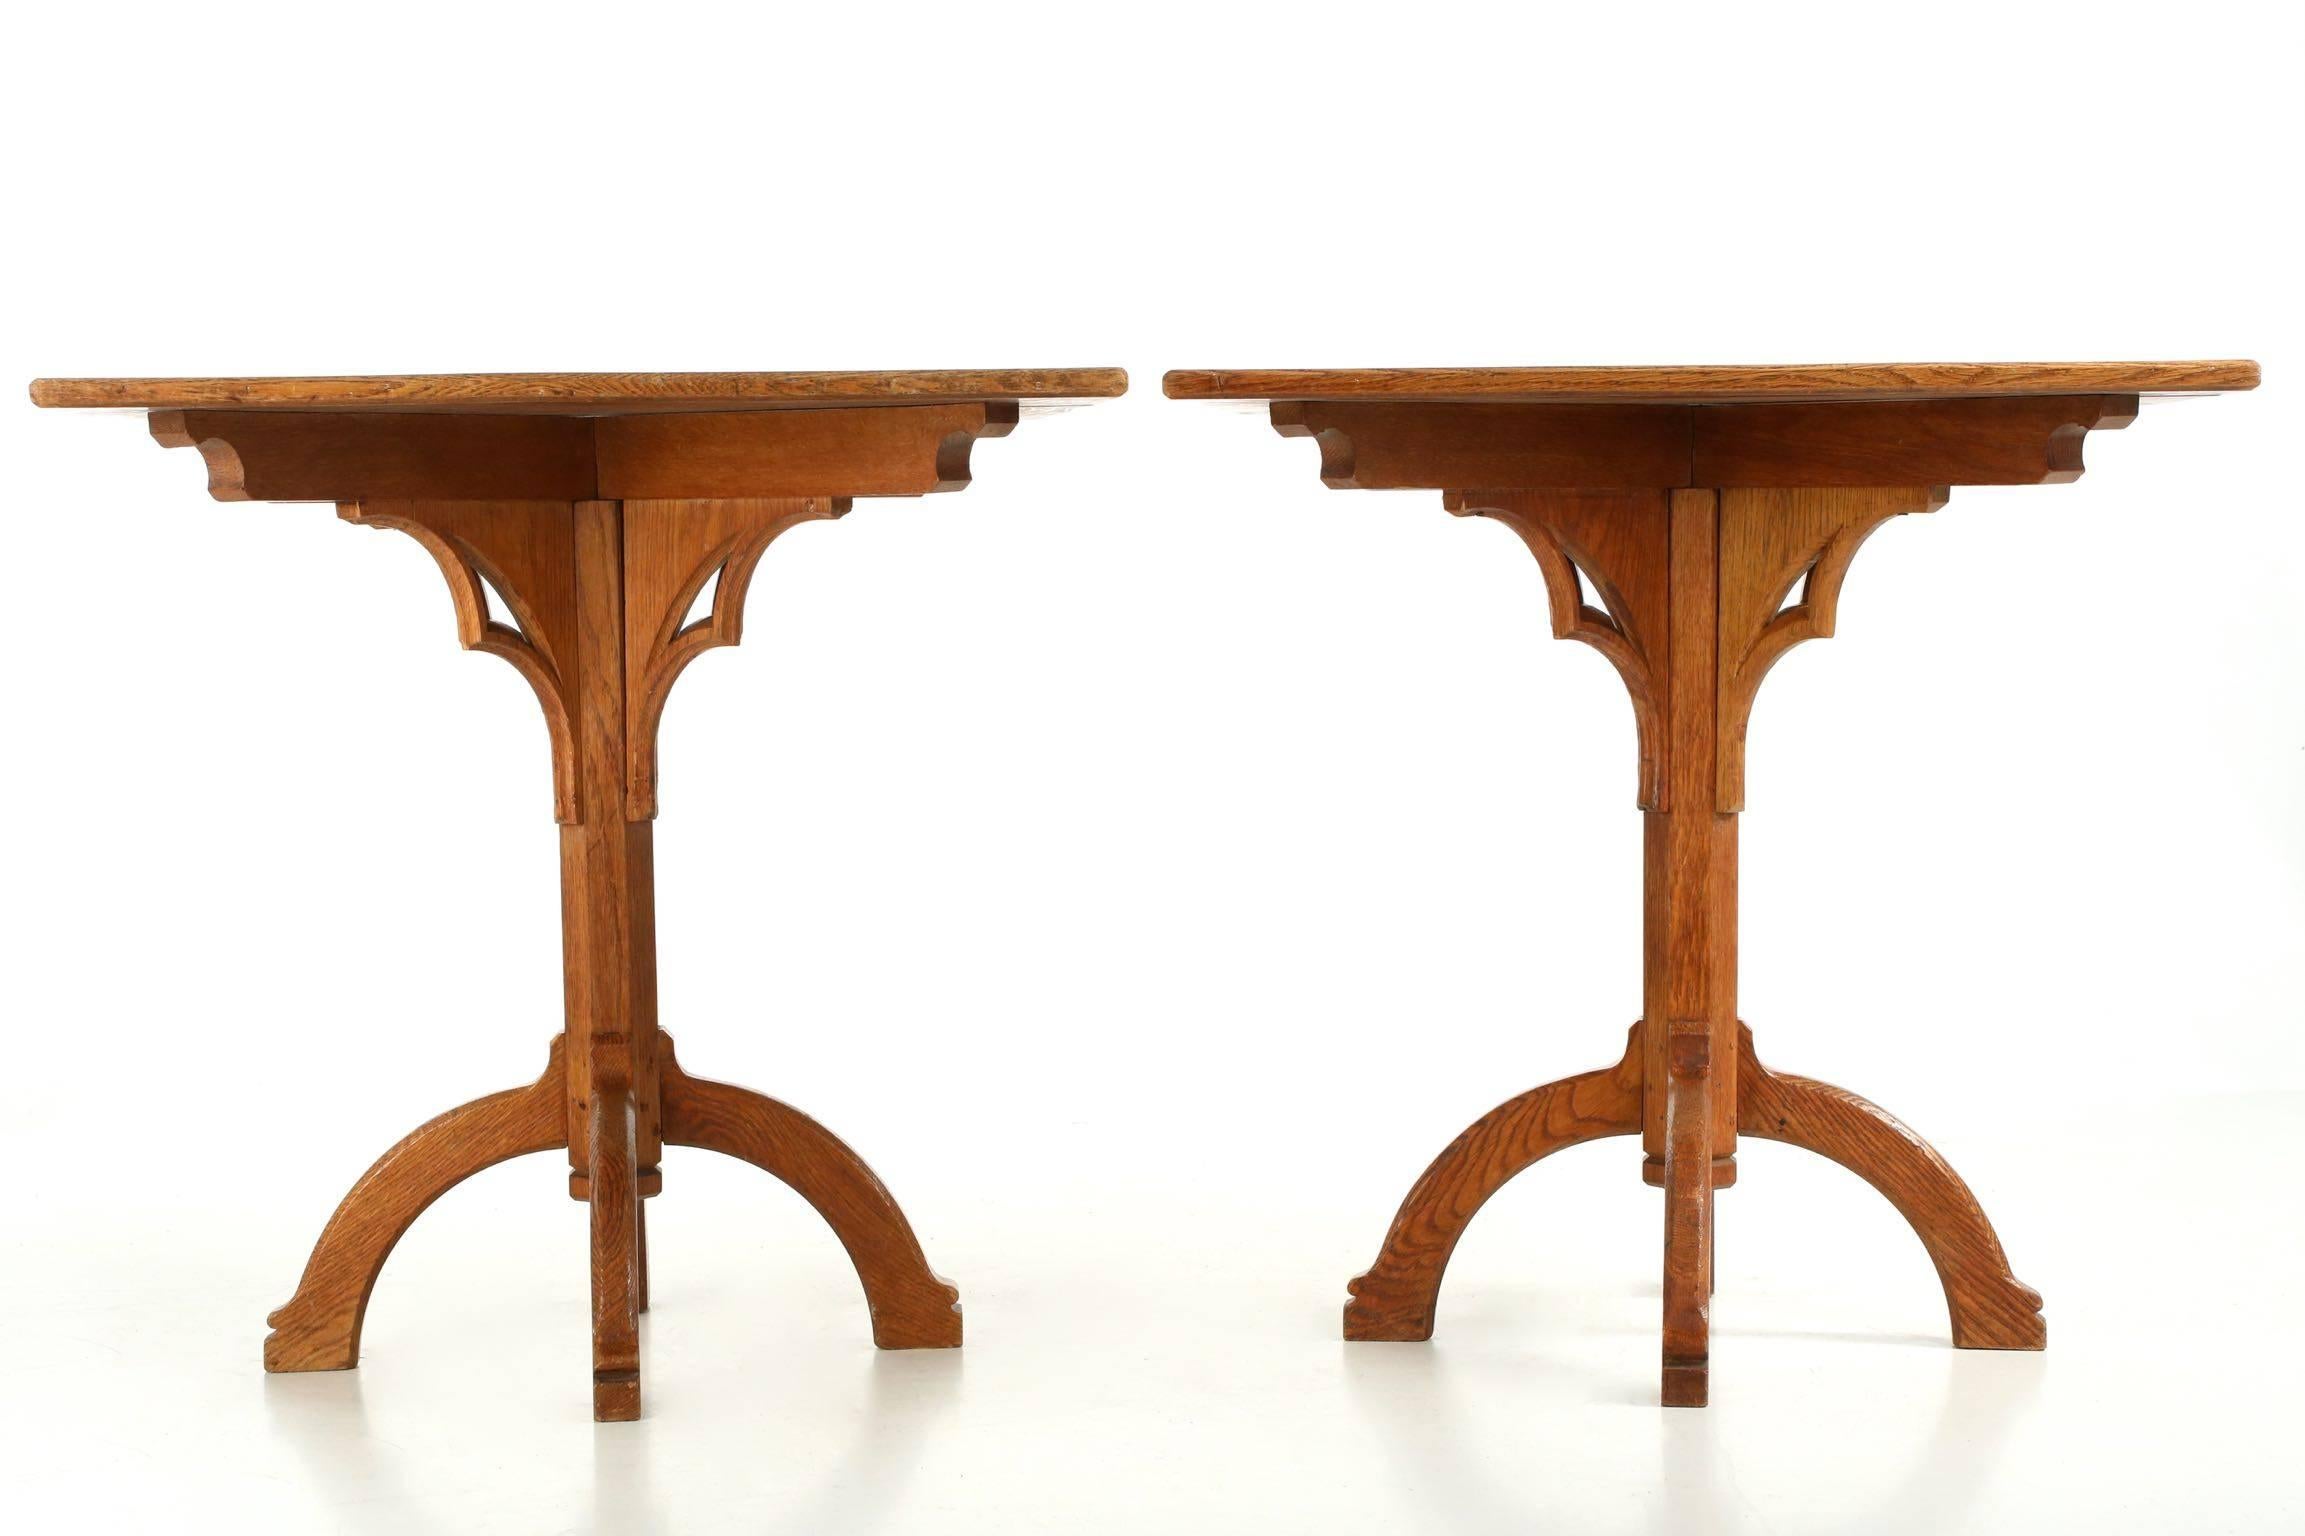 This most attractive pair of Arts and Crafts side tables feature nicely figured red oak quarter sawn to showcase the grain pattern, which was carefully stained with a darker color that was hand wiped on and immediately wiped off, leaving only enough